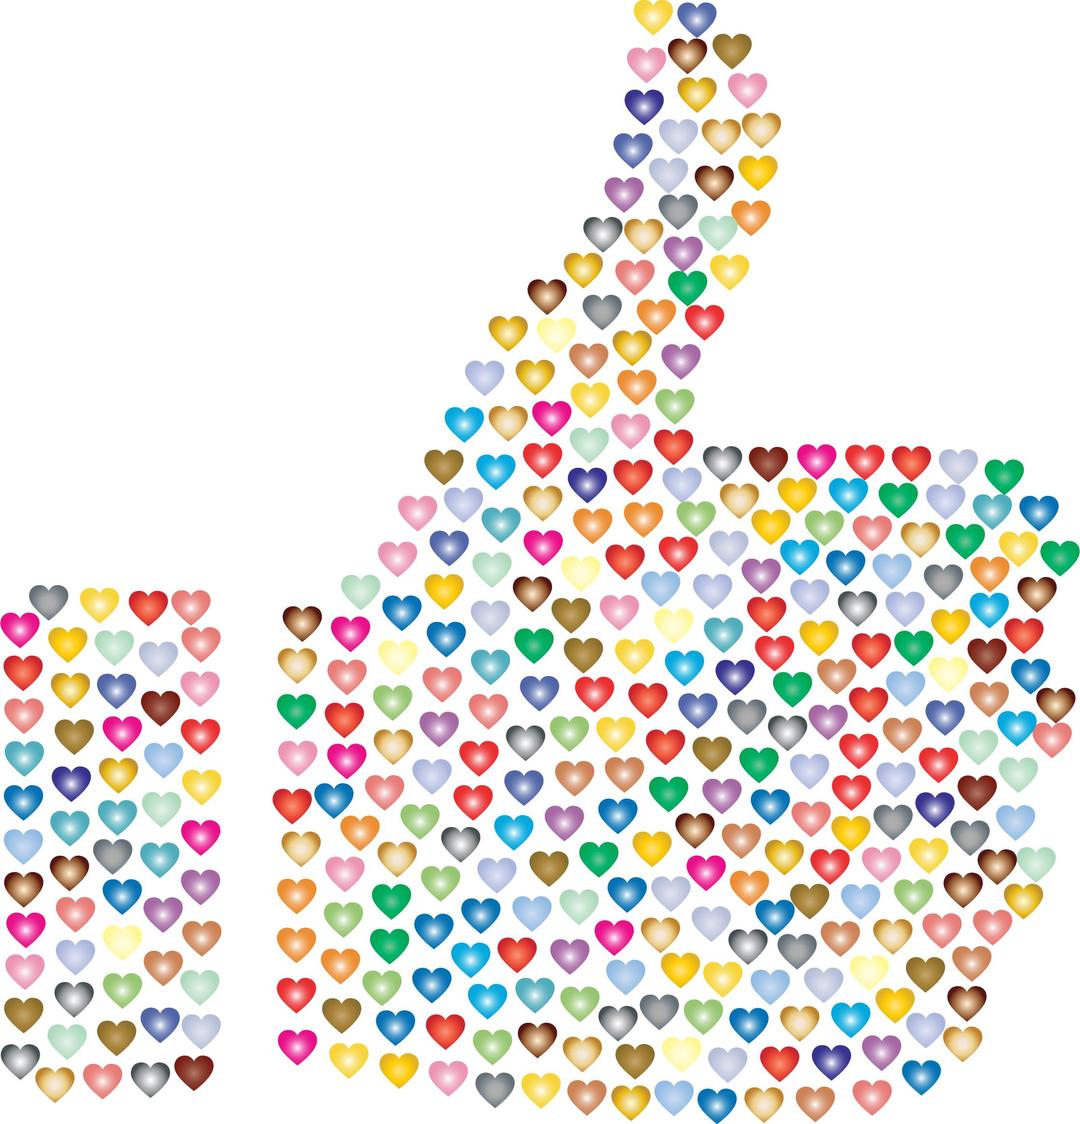 Prismatic Hearts Thumbs Up Silhouette 3 No Background png transparent